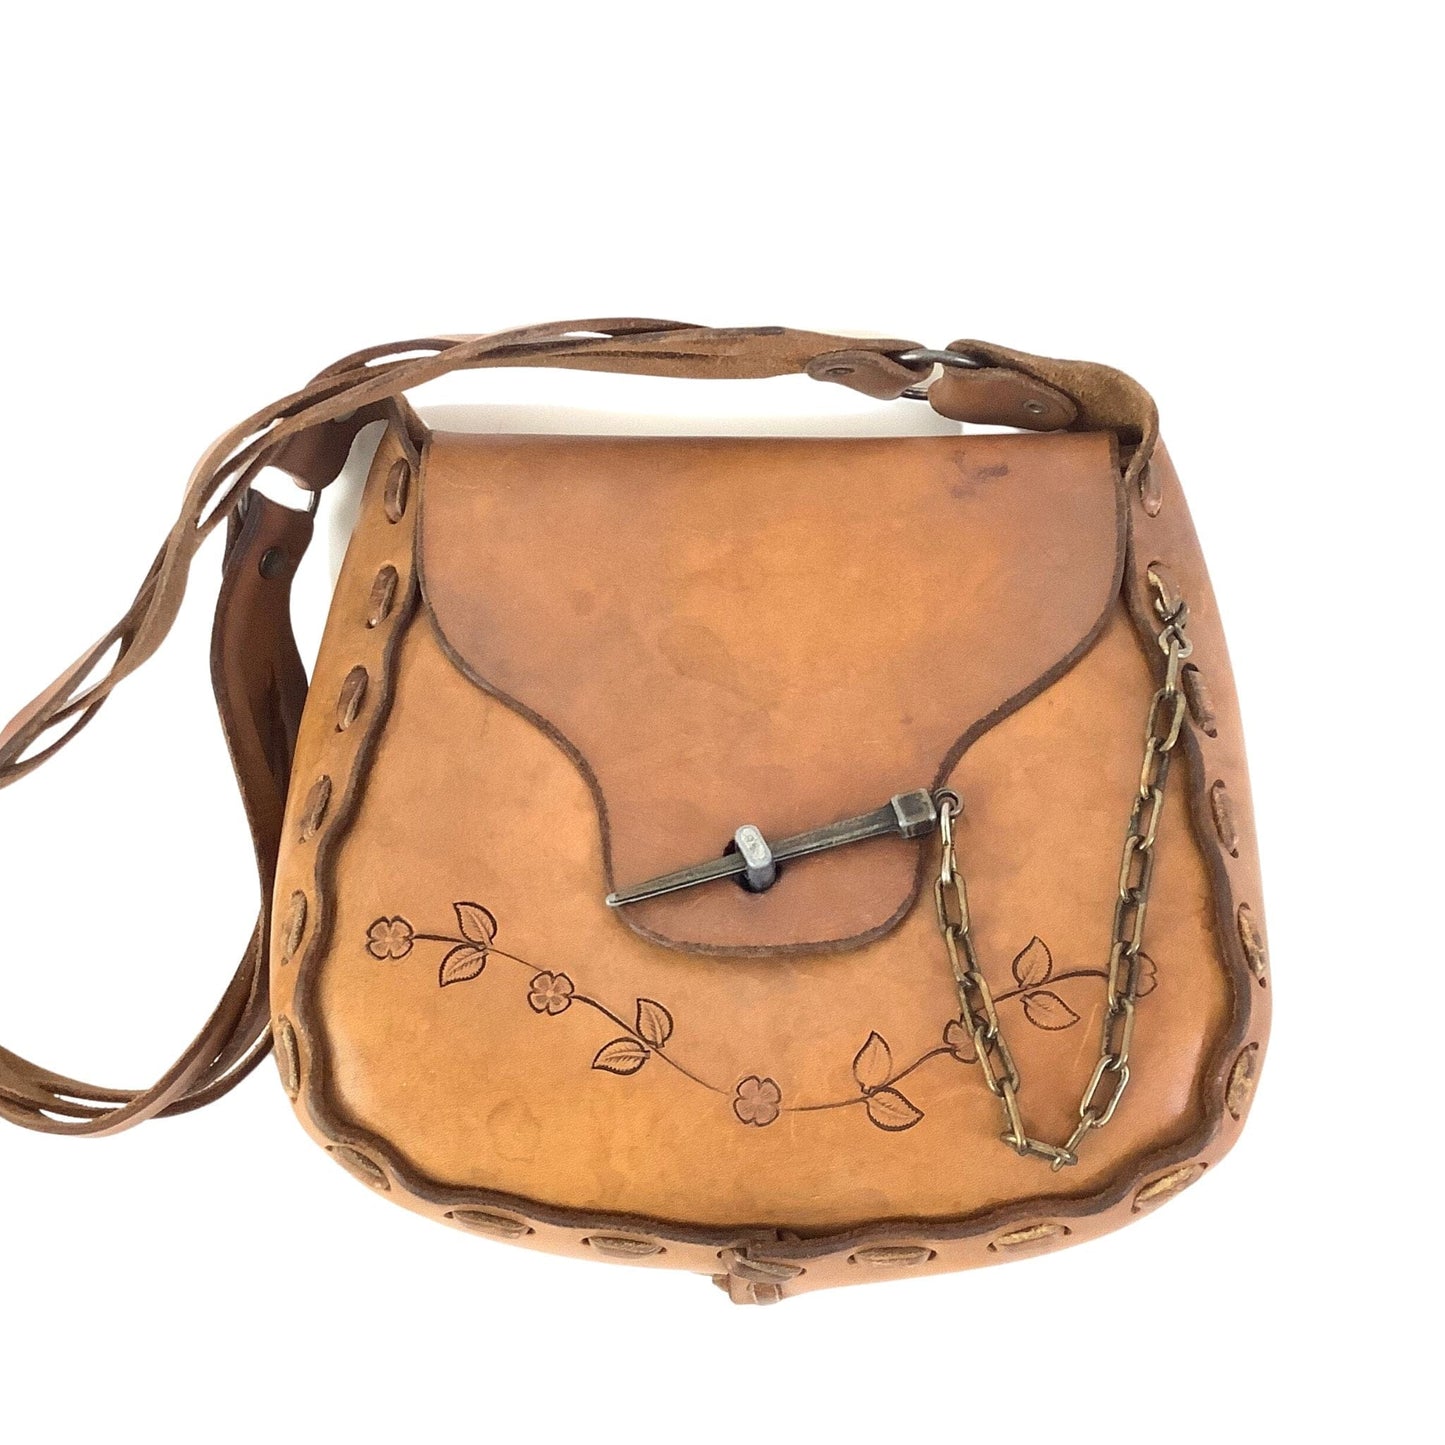 1970s Hippie Leather Bag Tan / Leather / Vintage 1970s